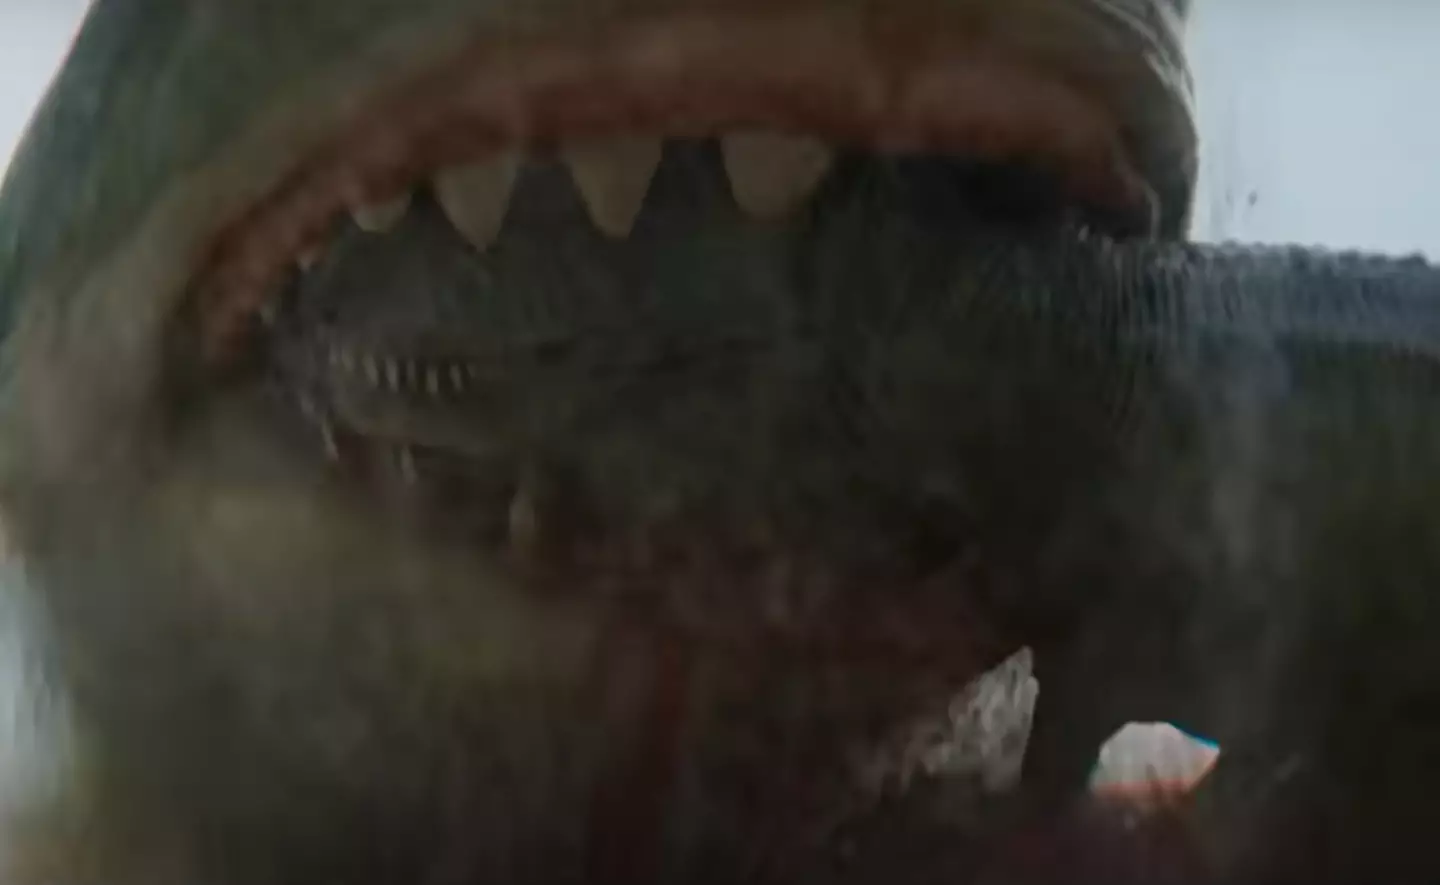 Spoiler alert! The dinosaur 'aint winning this one. What did you expect? This is a shark movie.